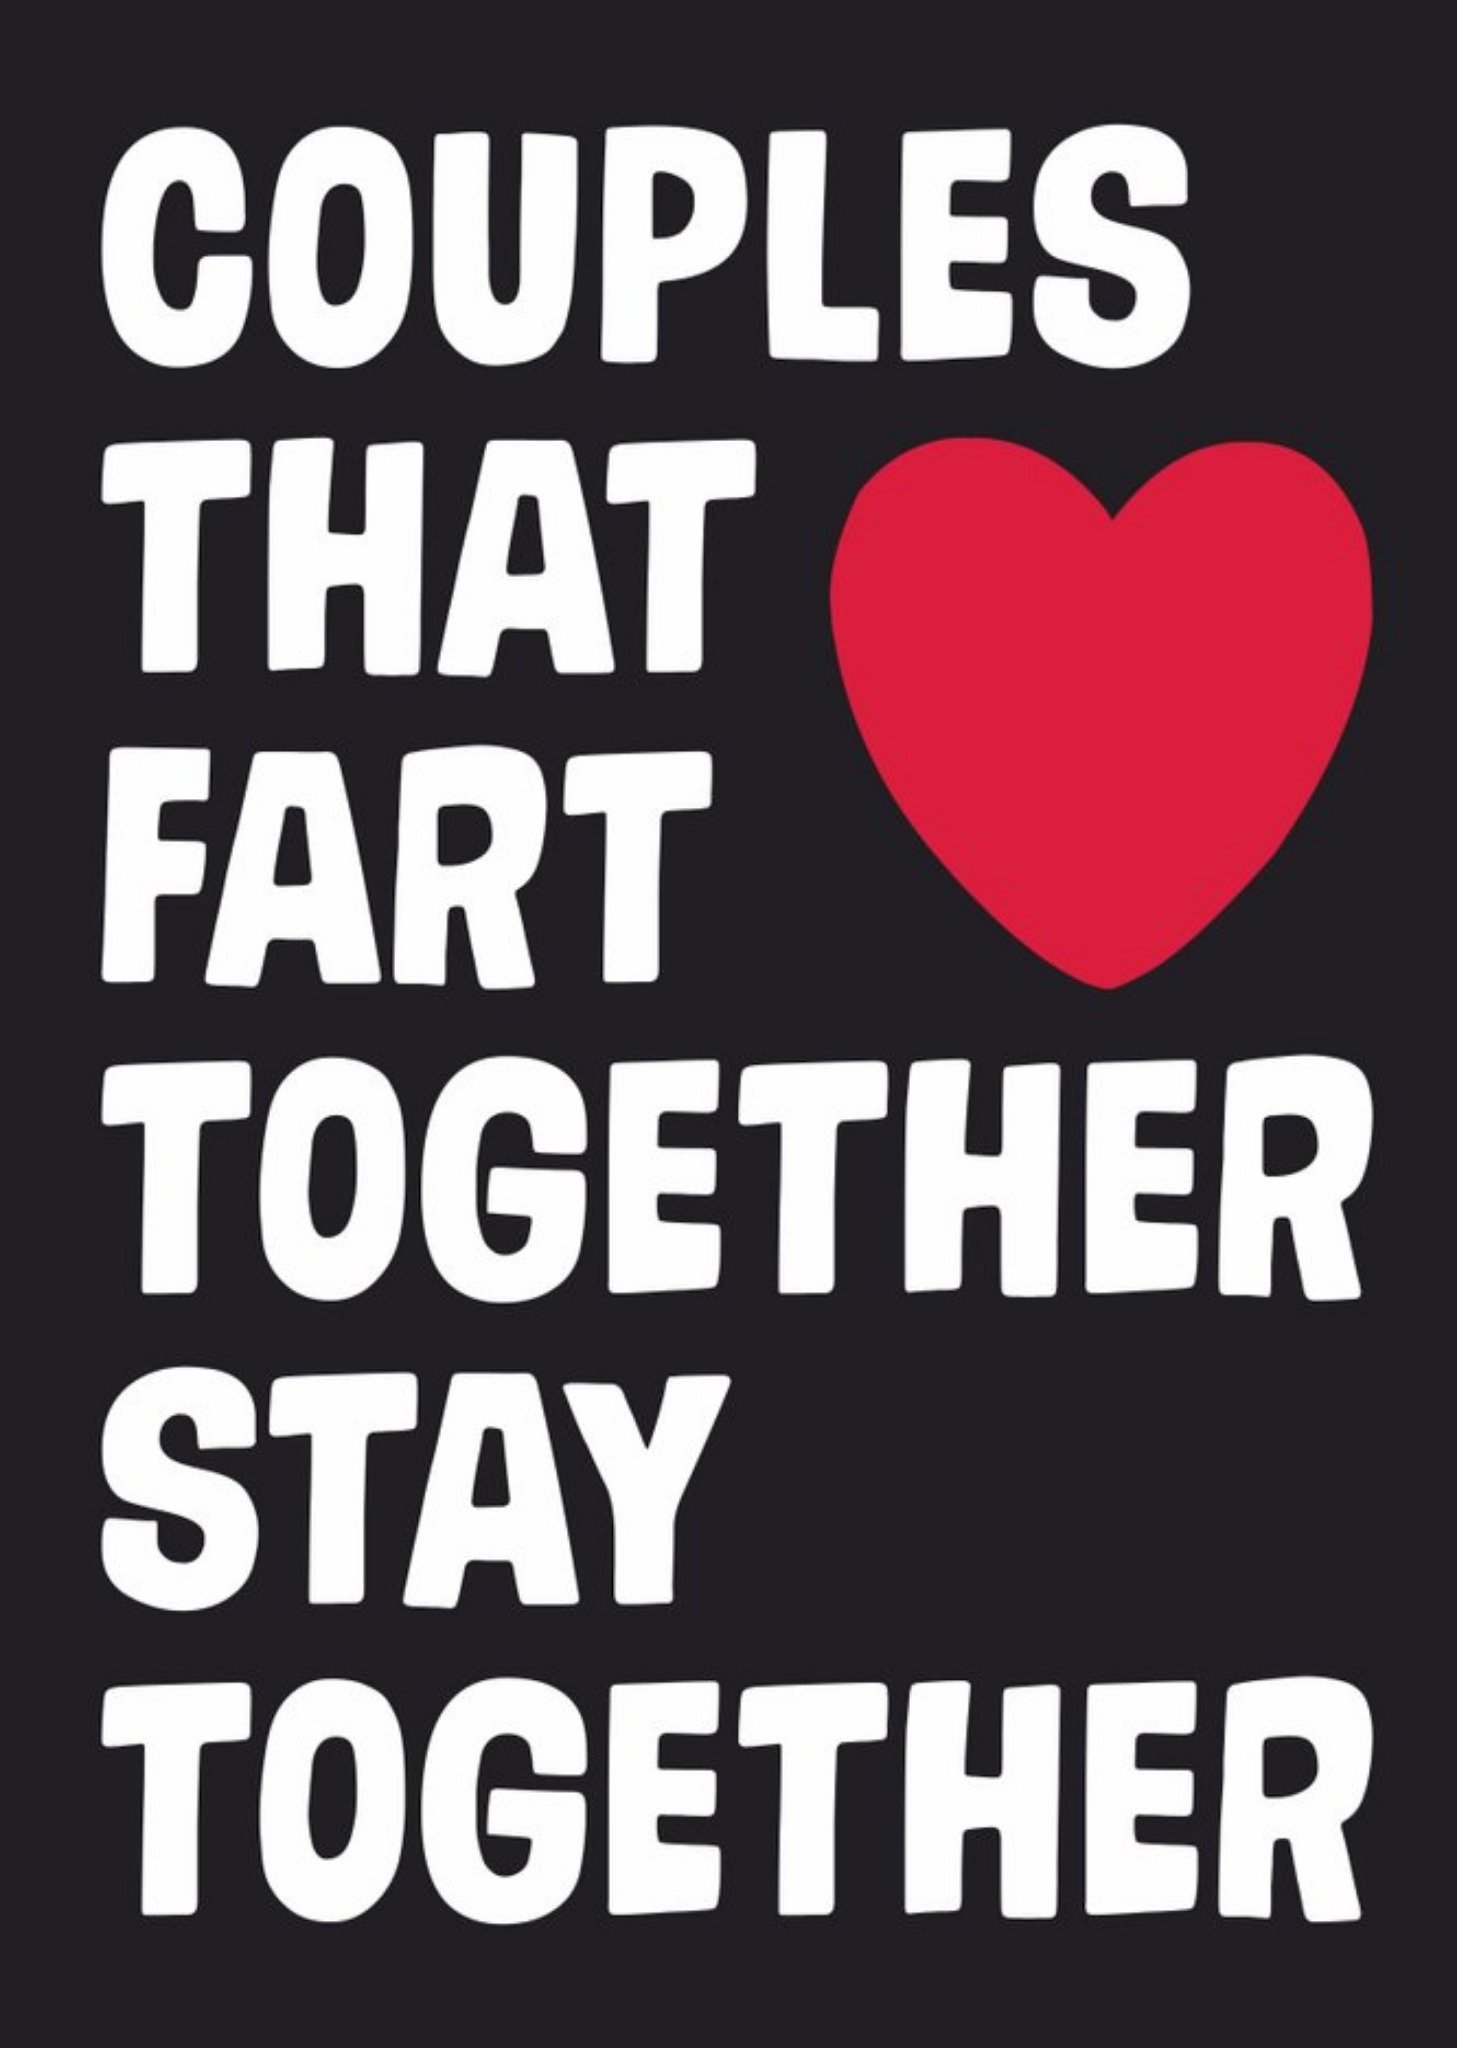 Moonpig Dean Morris Couples That Fart Together Stay Together Funny Valentine's Day Card Ecard